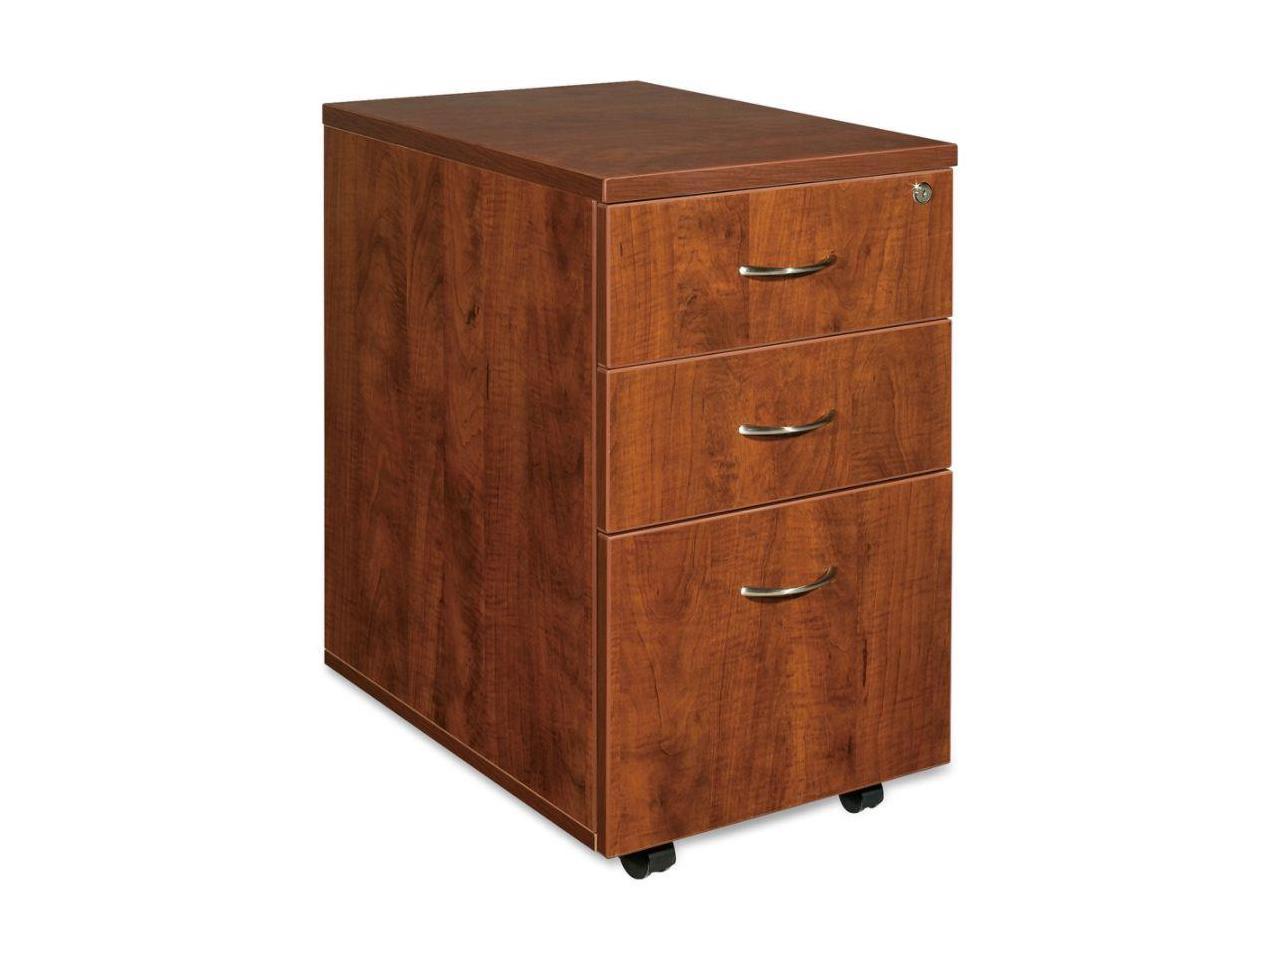 3 Drawers Vertical Wood Composite Lockable Filing Cabinet, Cherry - image 2 of 10